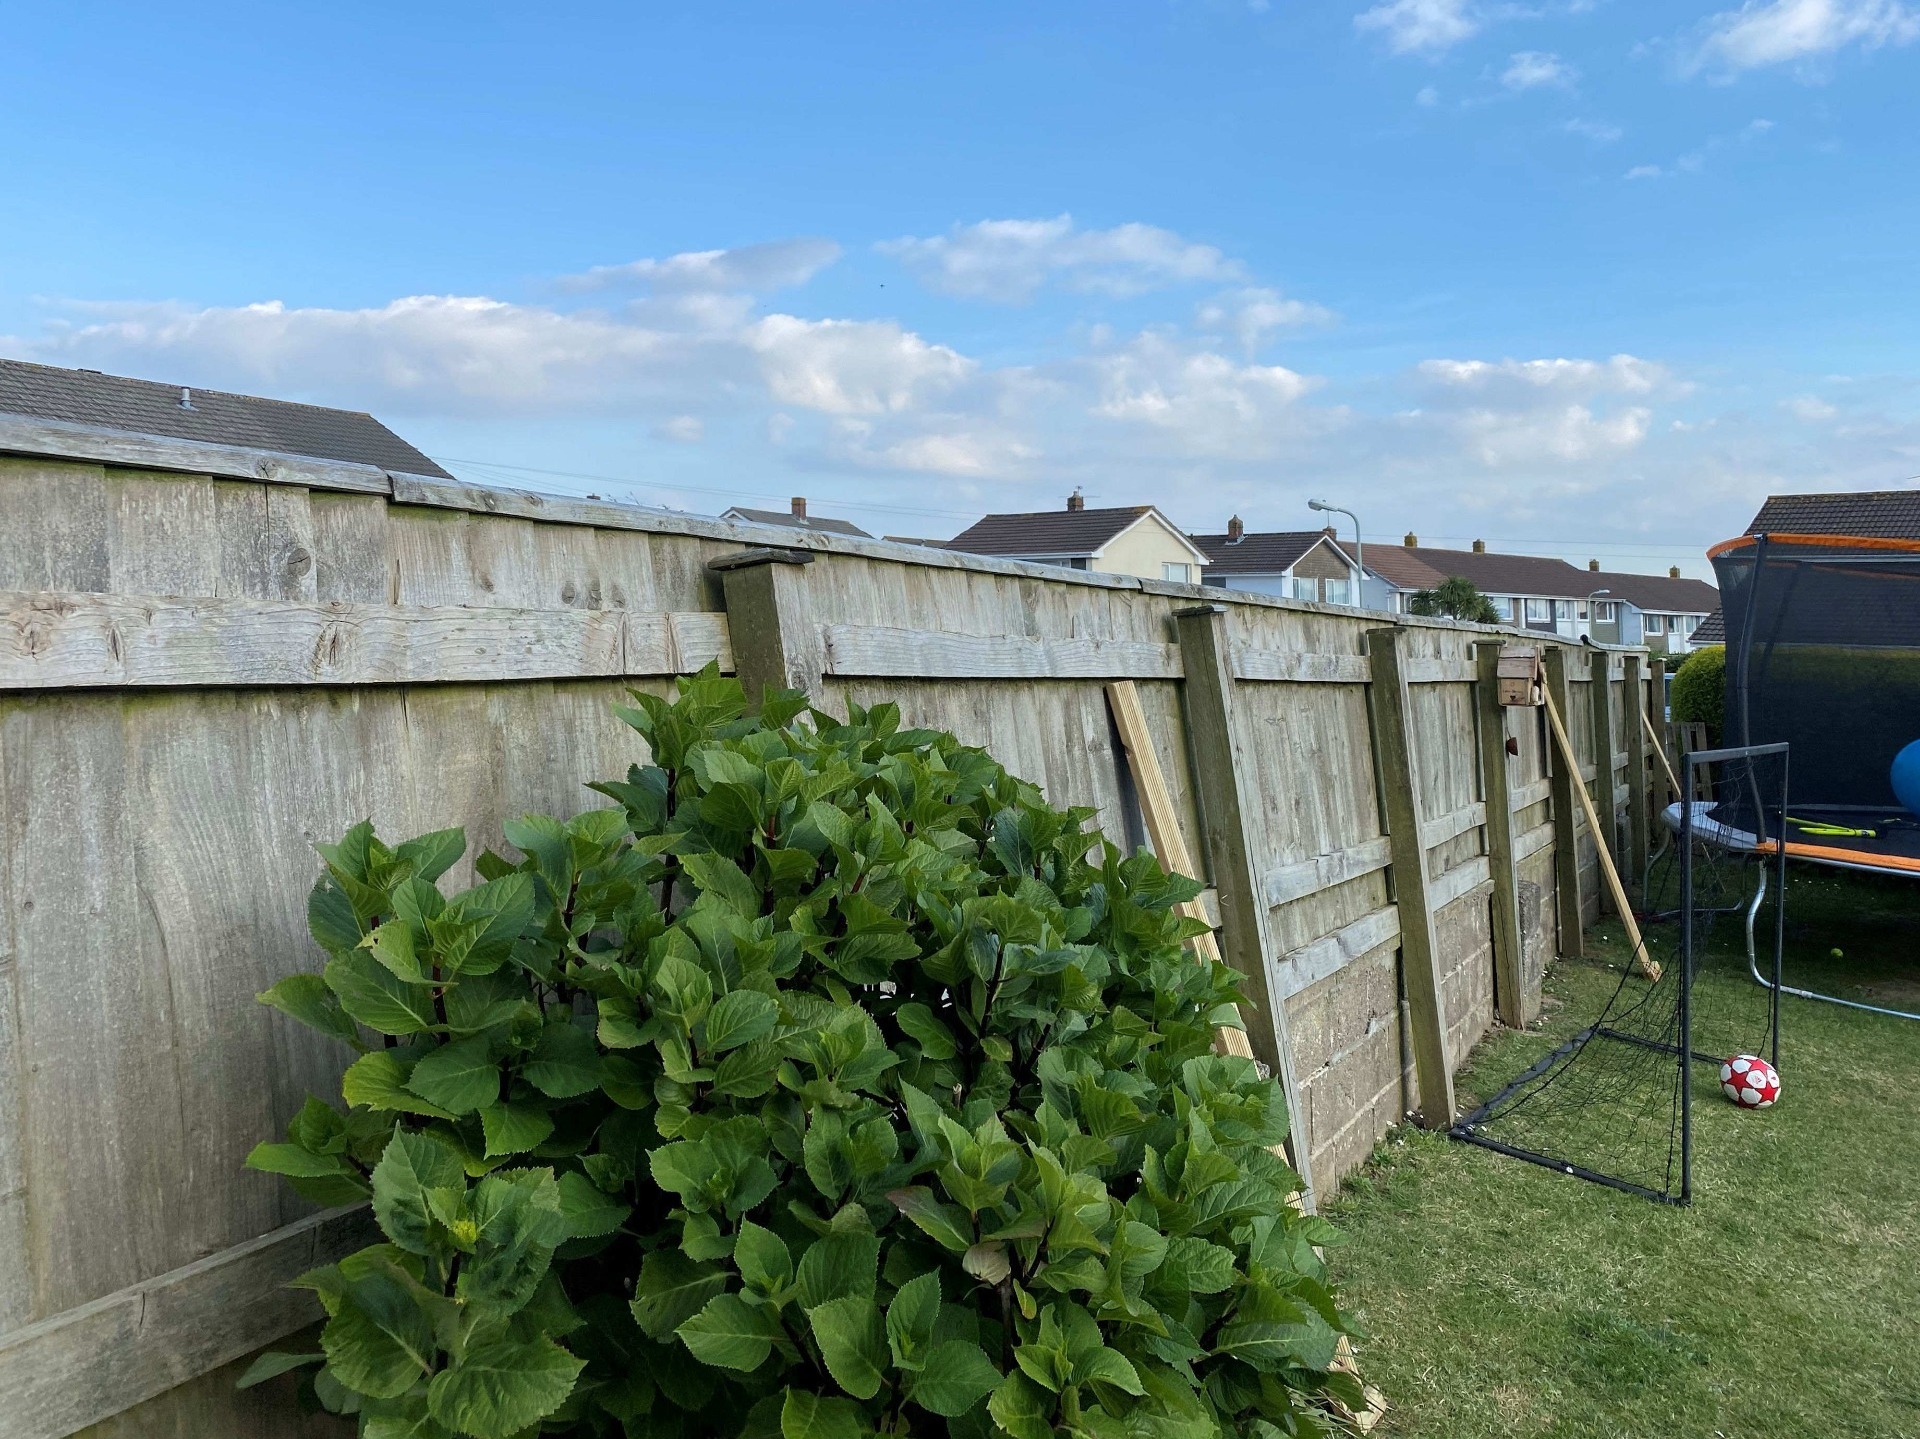 The old wooden fence had failed, fence posts and boards removed and disposed of. Barnstaple North Devon